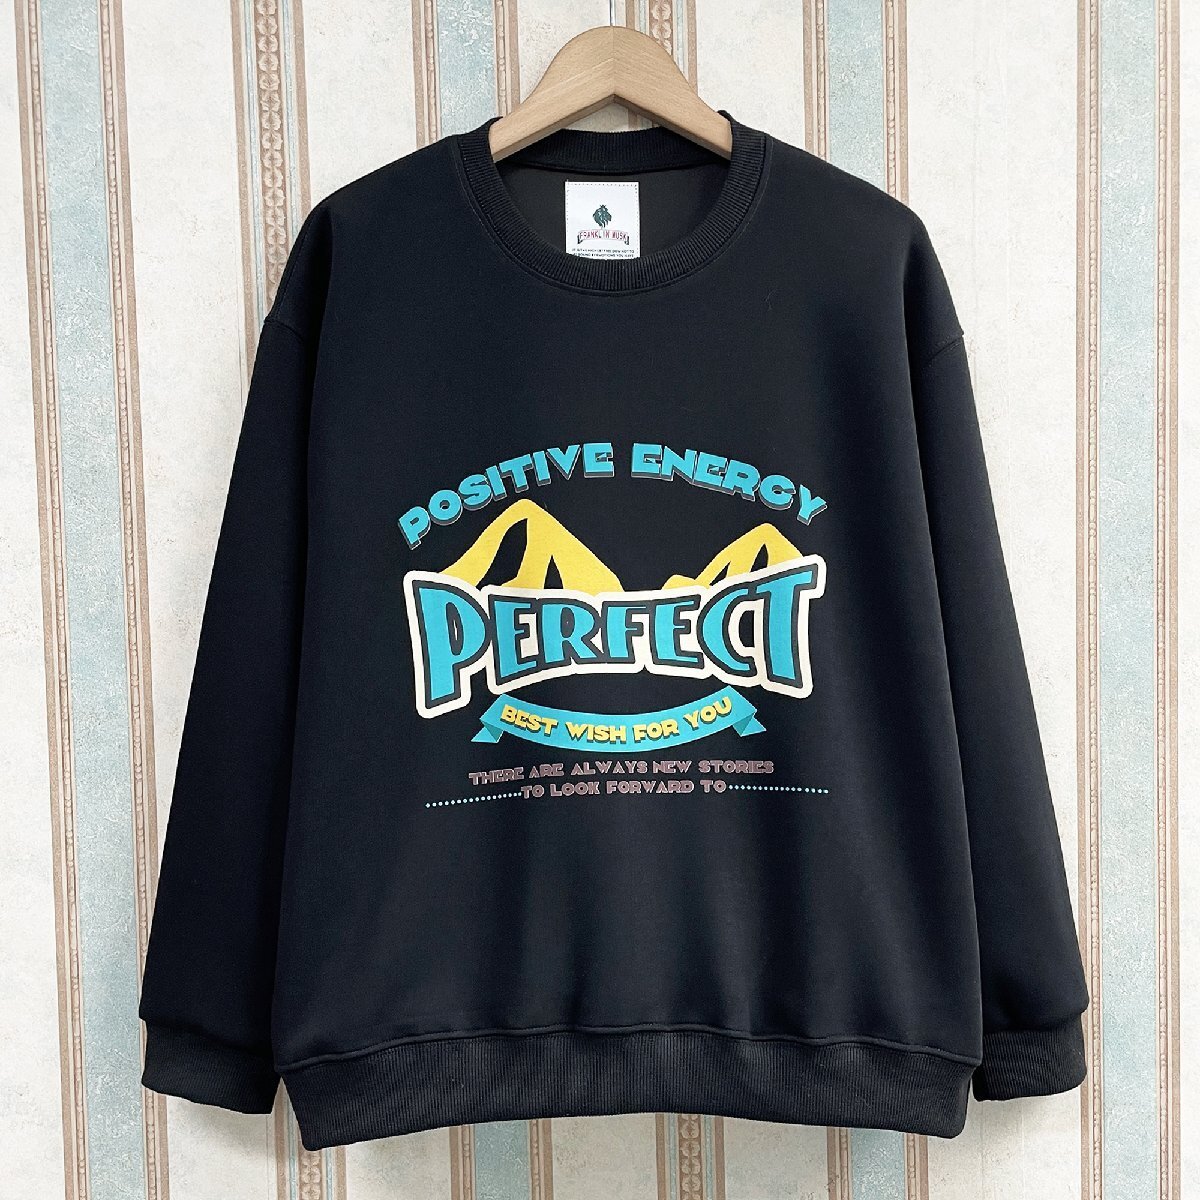  standard regular price 4 ten thousand FRANKLIN MUSK* America * New York departure sweatshirt on goods piece . cotton 100% soft britain character pattern American Casual pull over everyday size 3